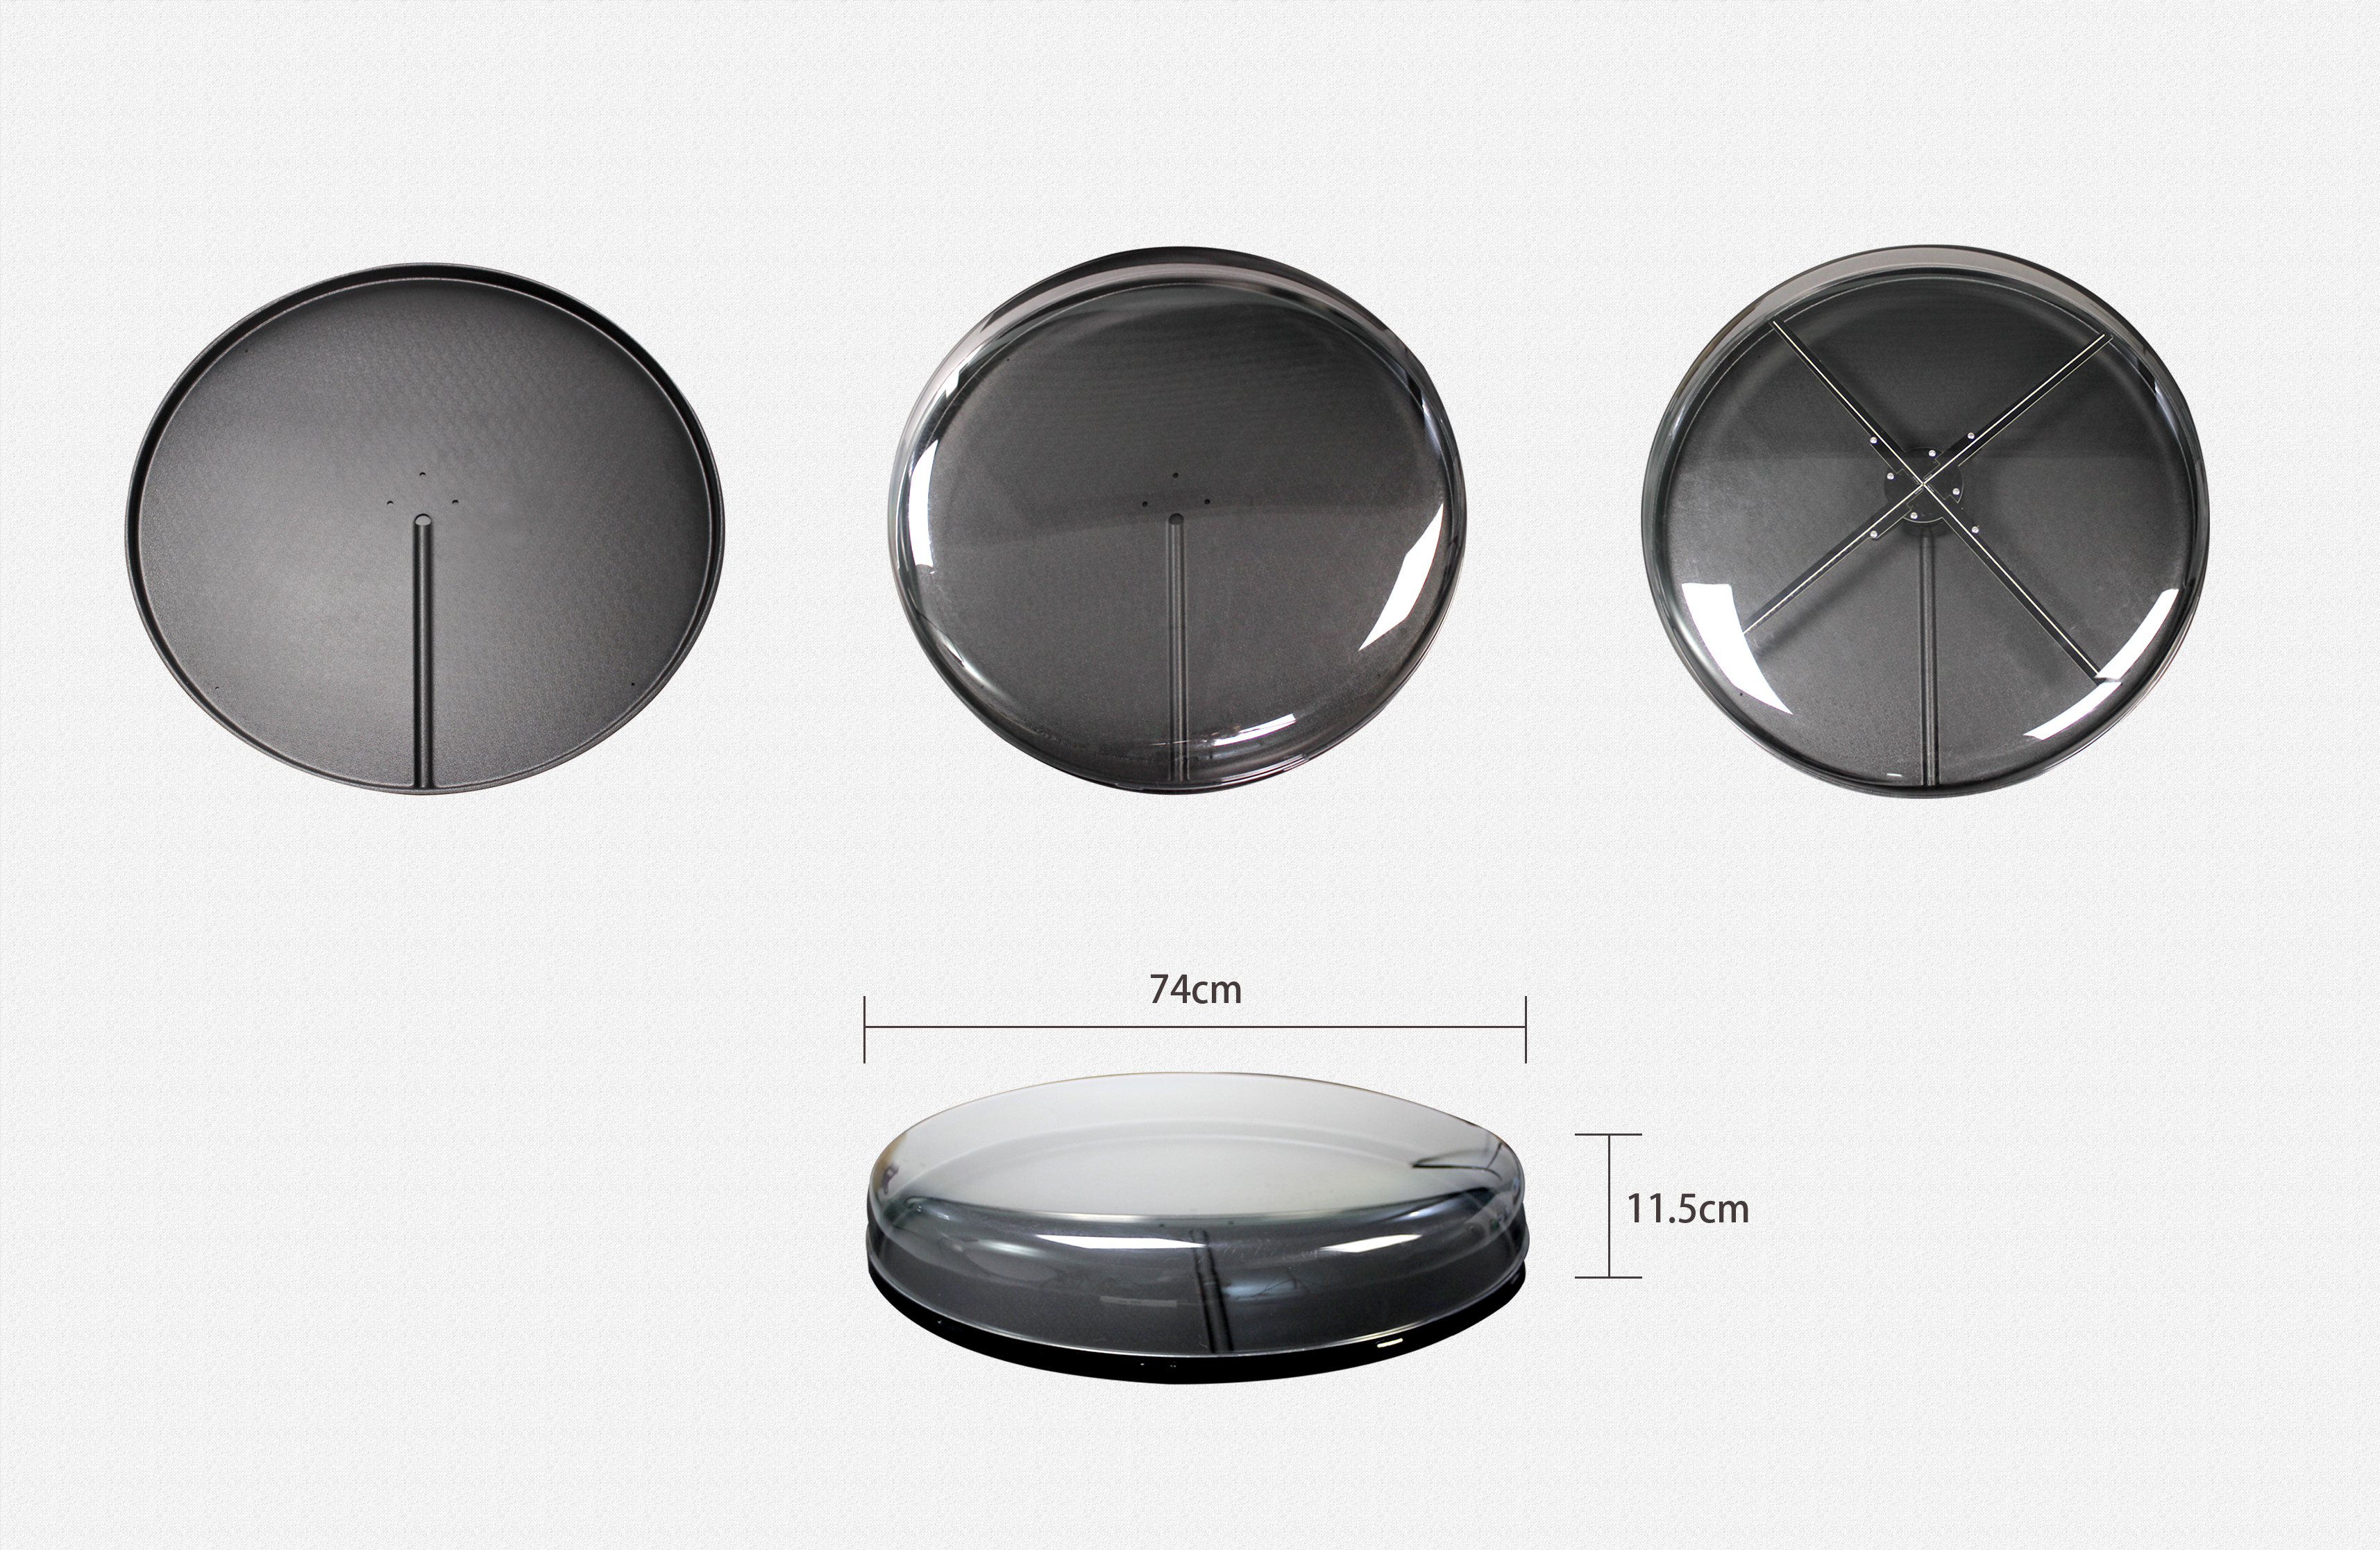 Acrylic protection cover for hologram fan, fitting for Z2 42cm/Z7 52cm/Z6 56cm/Z3 65cm/Z5 100cm hologram fan